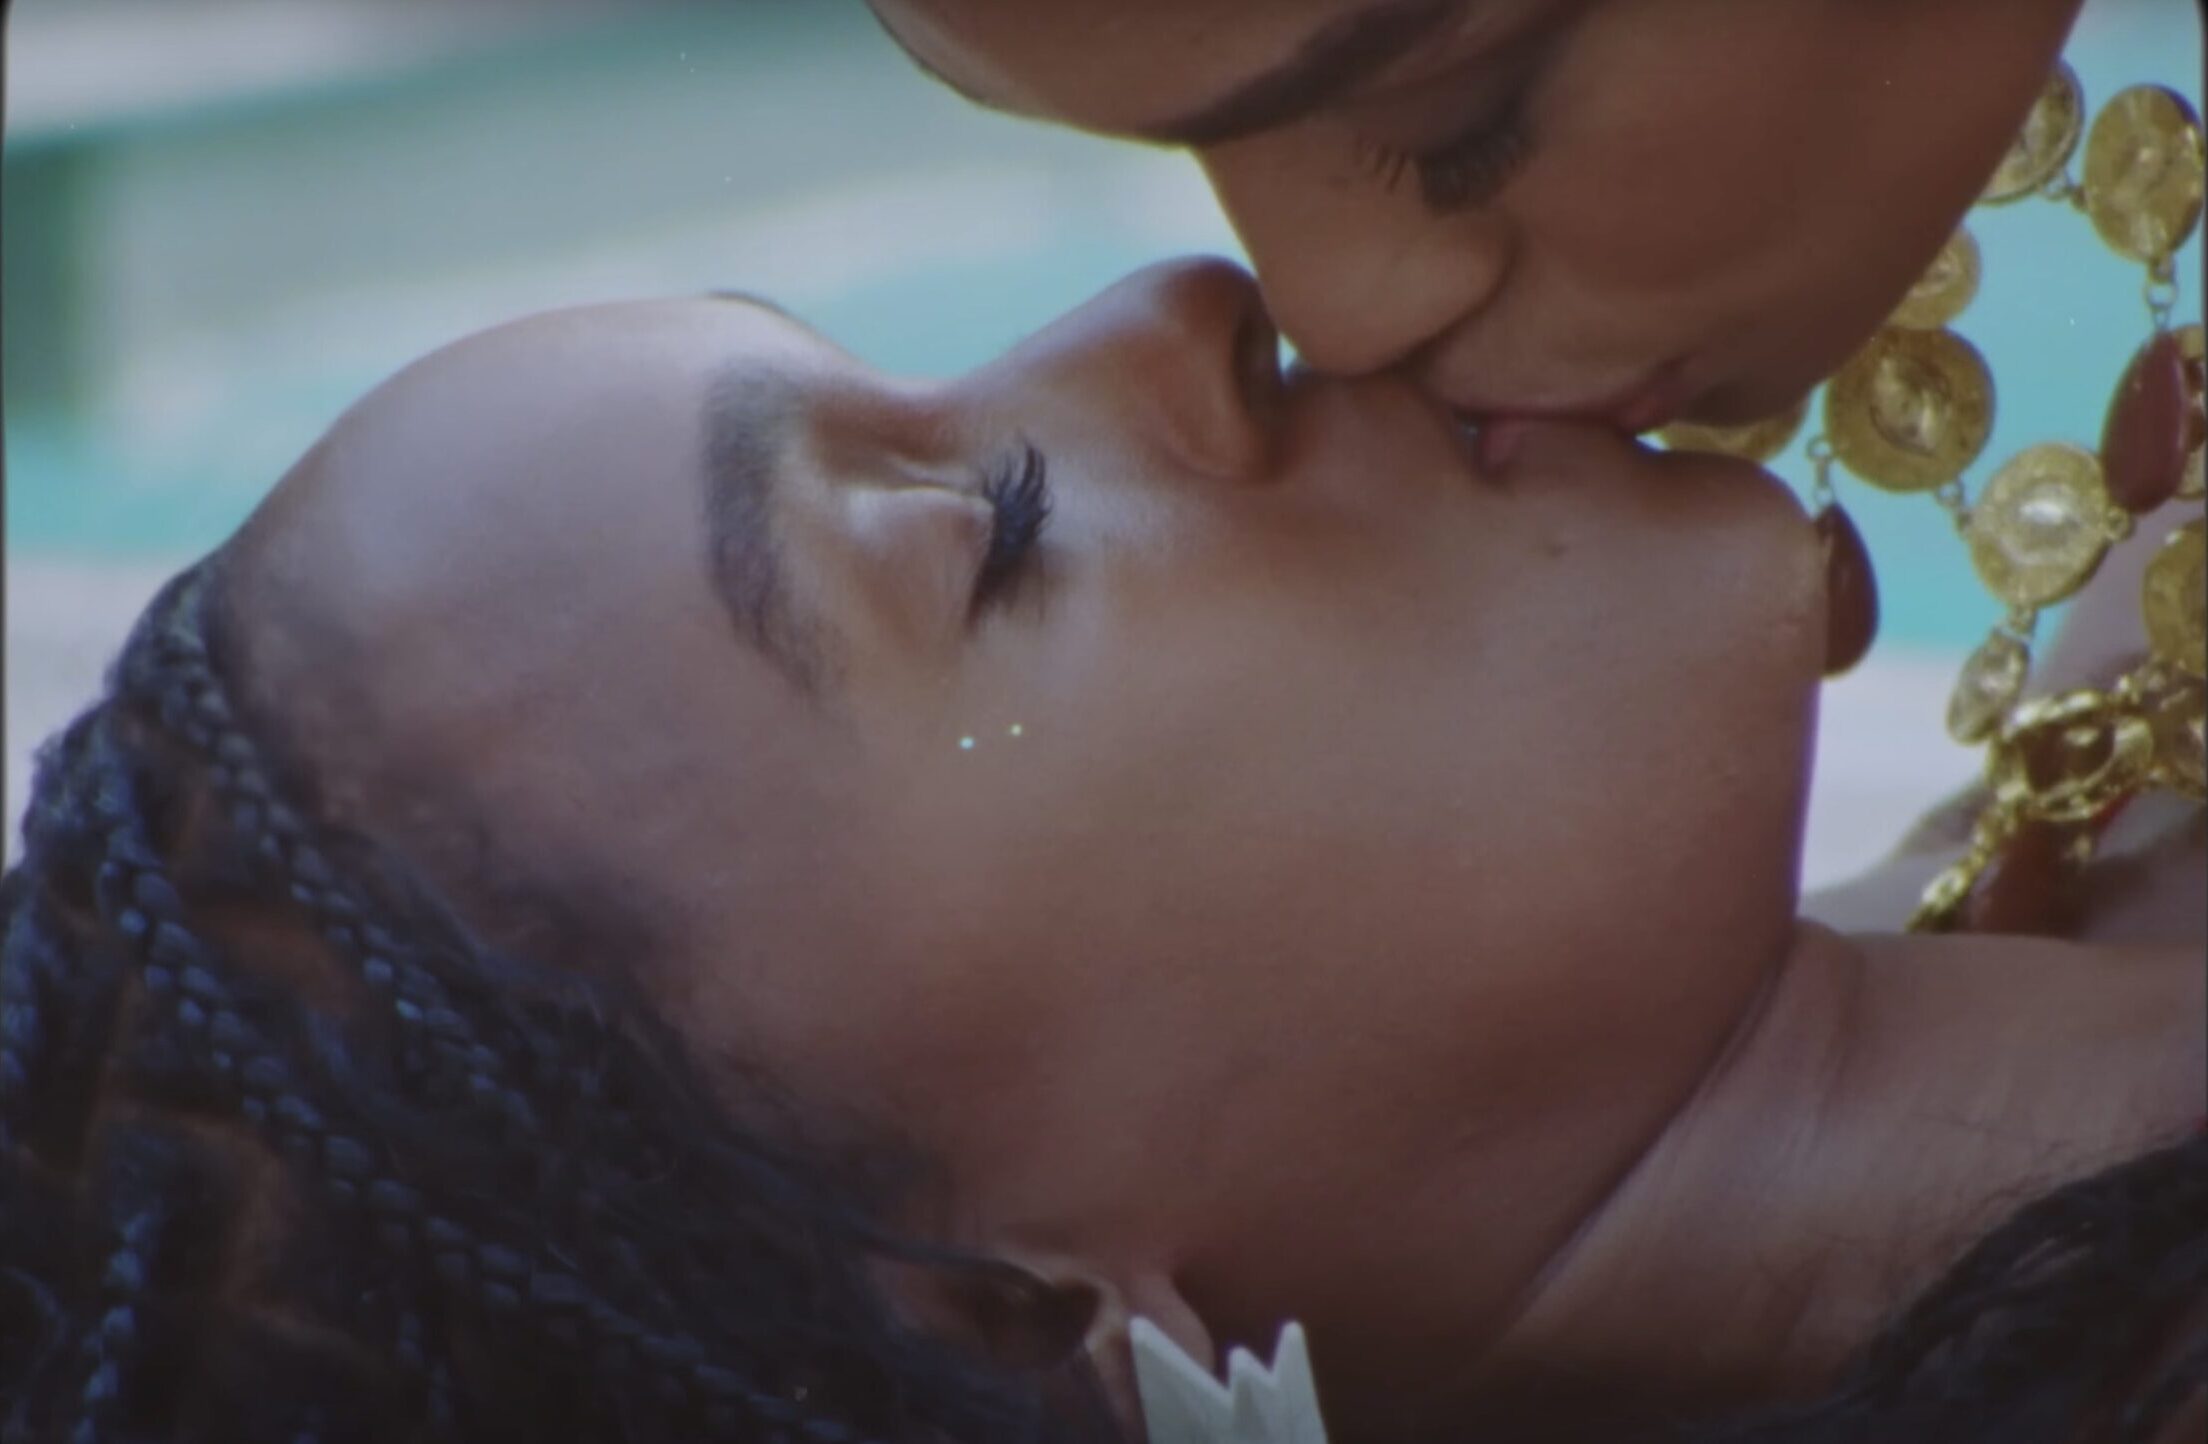 Janelle Monáe being kissed by a woman in the "Lipstick Lover" video